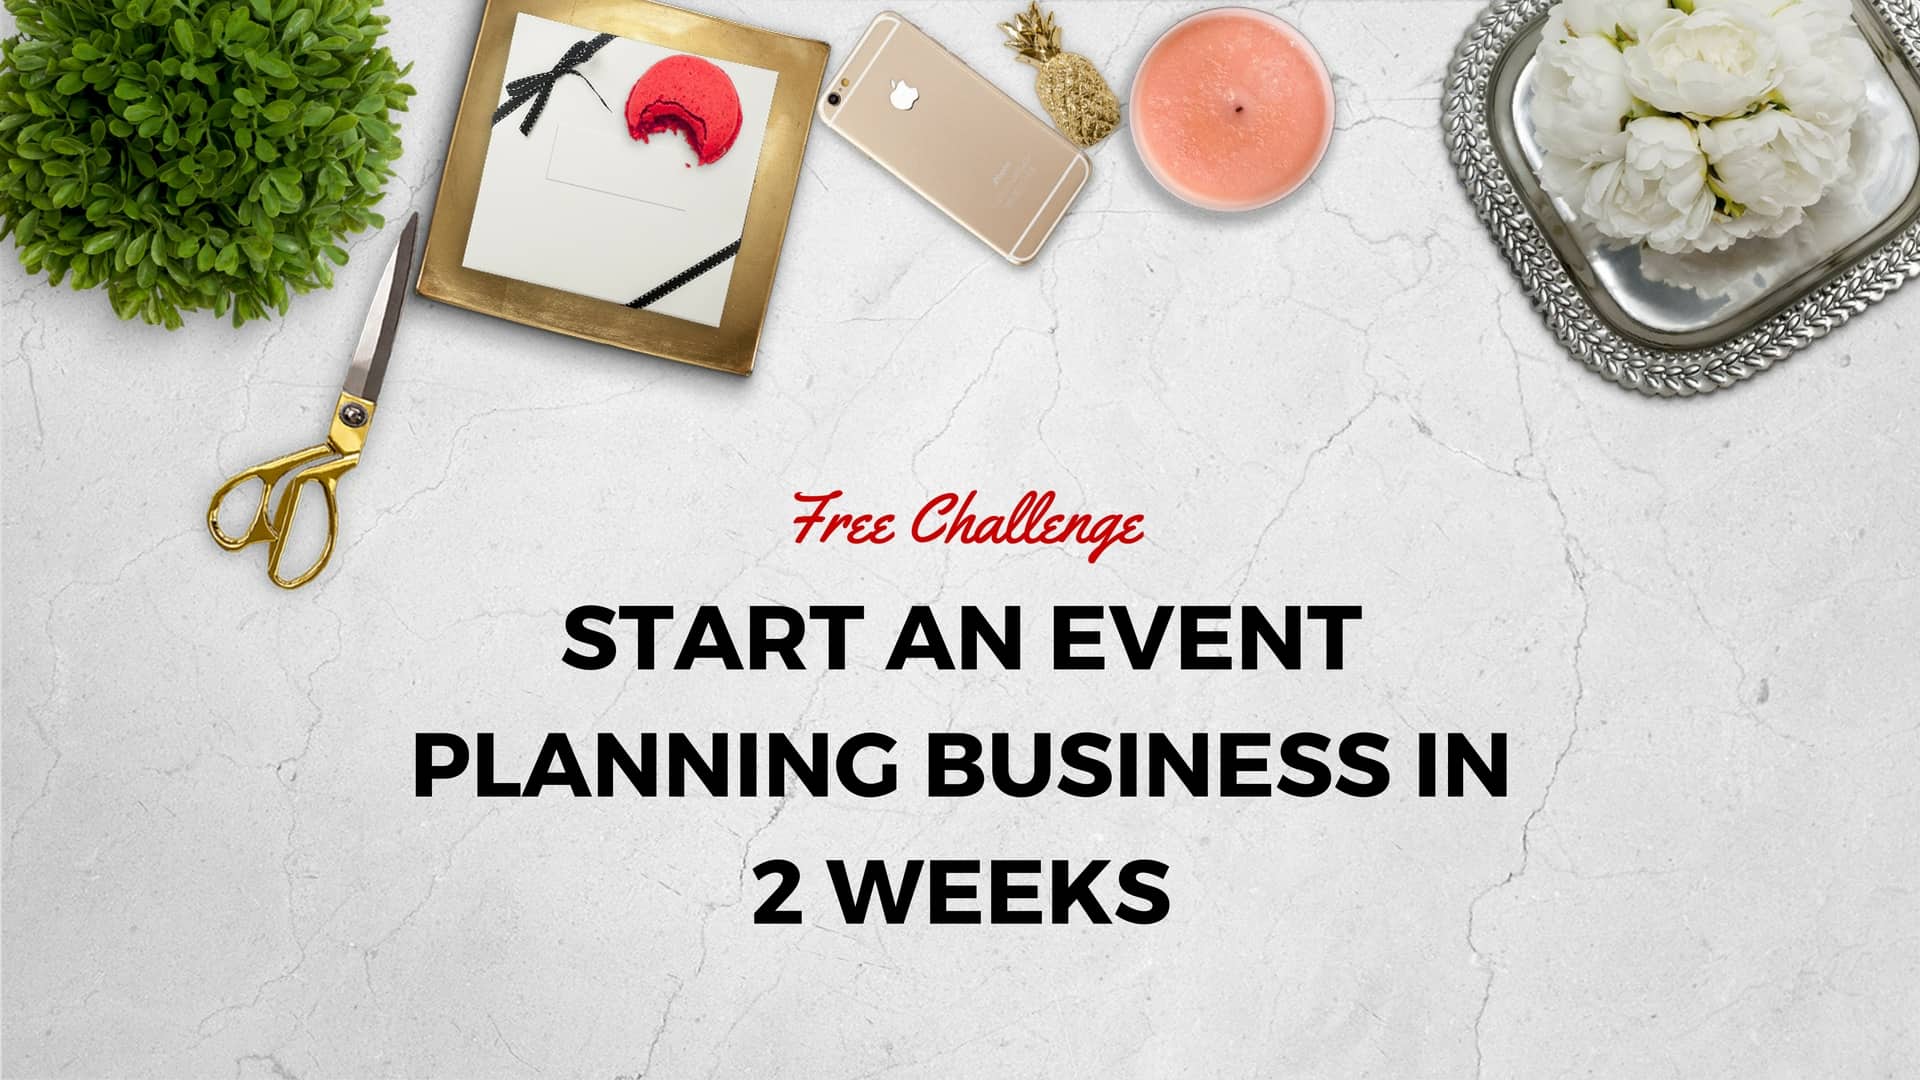 Start an Event Planning Business in 2 Weeks